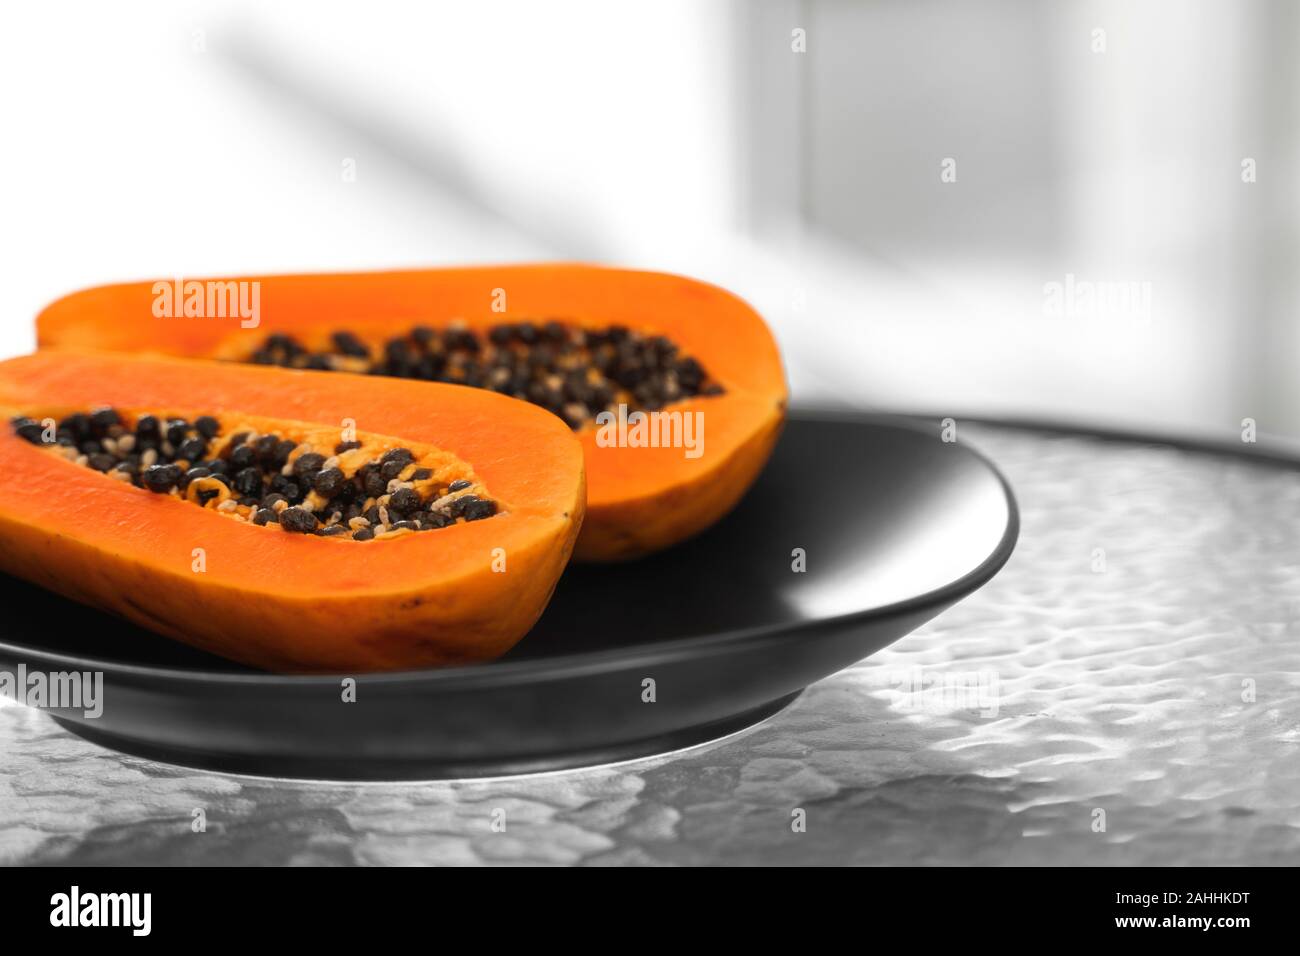 Two half of ripe papaya with seeds in a black plate on a glass table with a white background. Slices of sweet papaya image